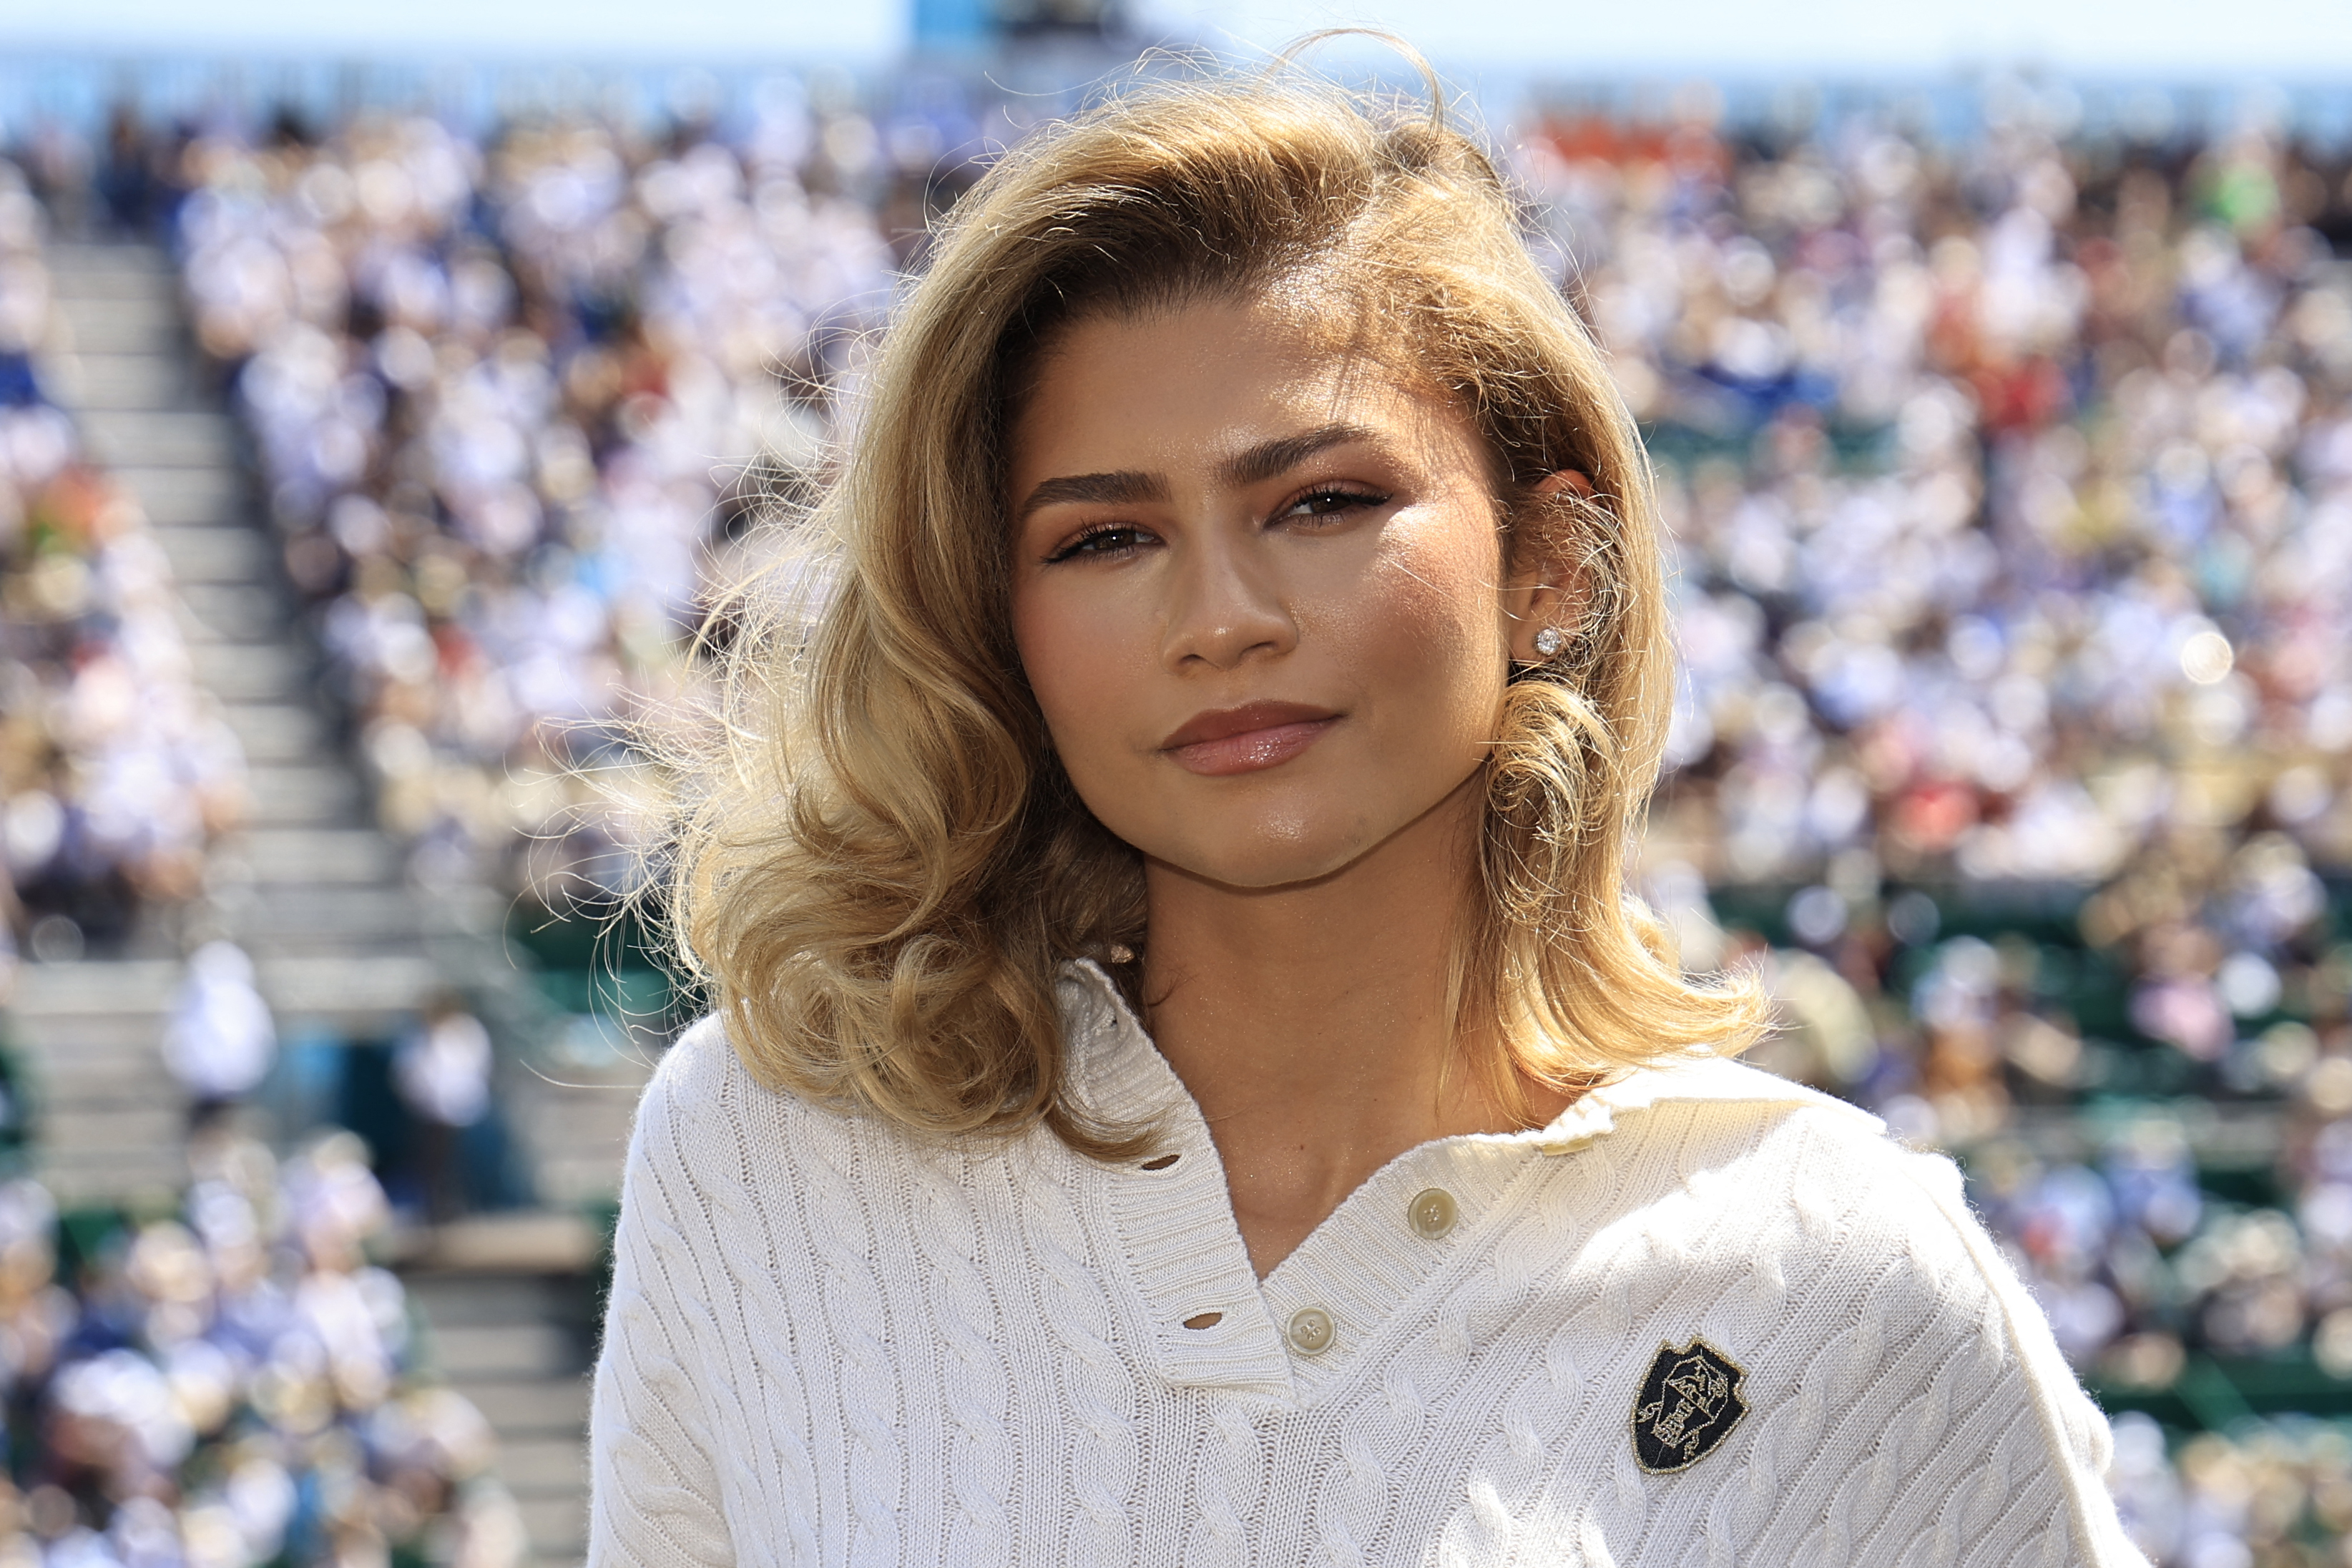 Zendaya wearing a white polo shirt with a knit design at an outdoor event